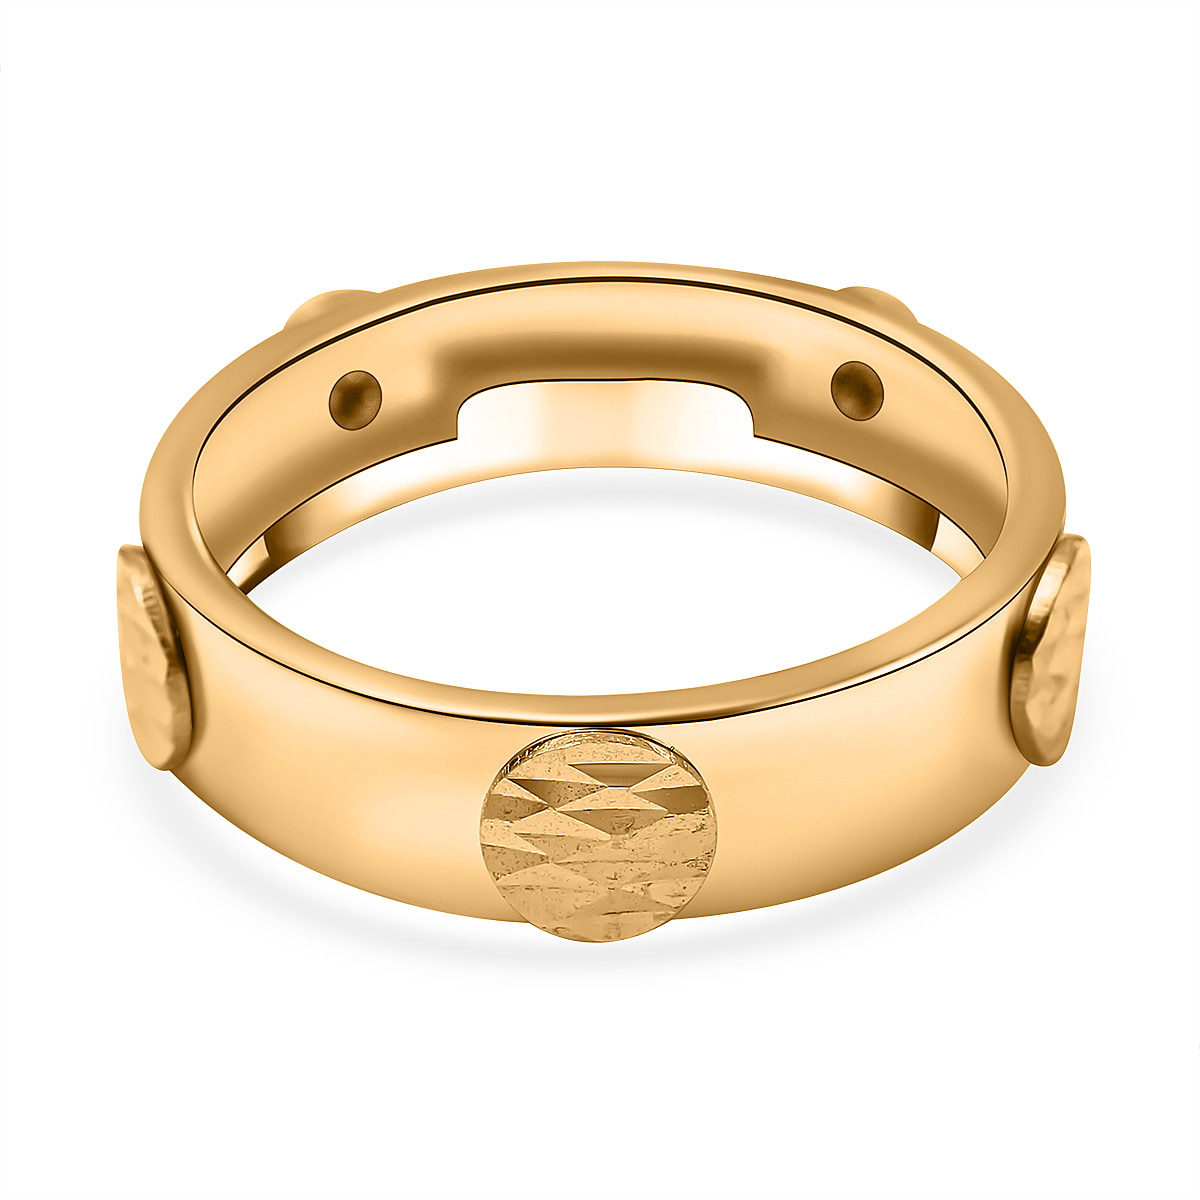 Maestro Collection - 9K Yellow Gold Circular Station Ring